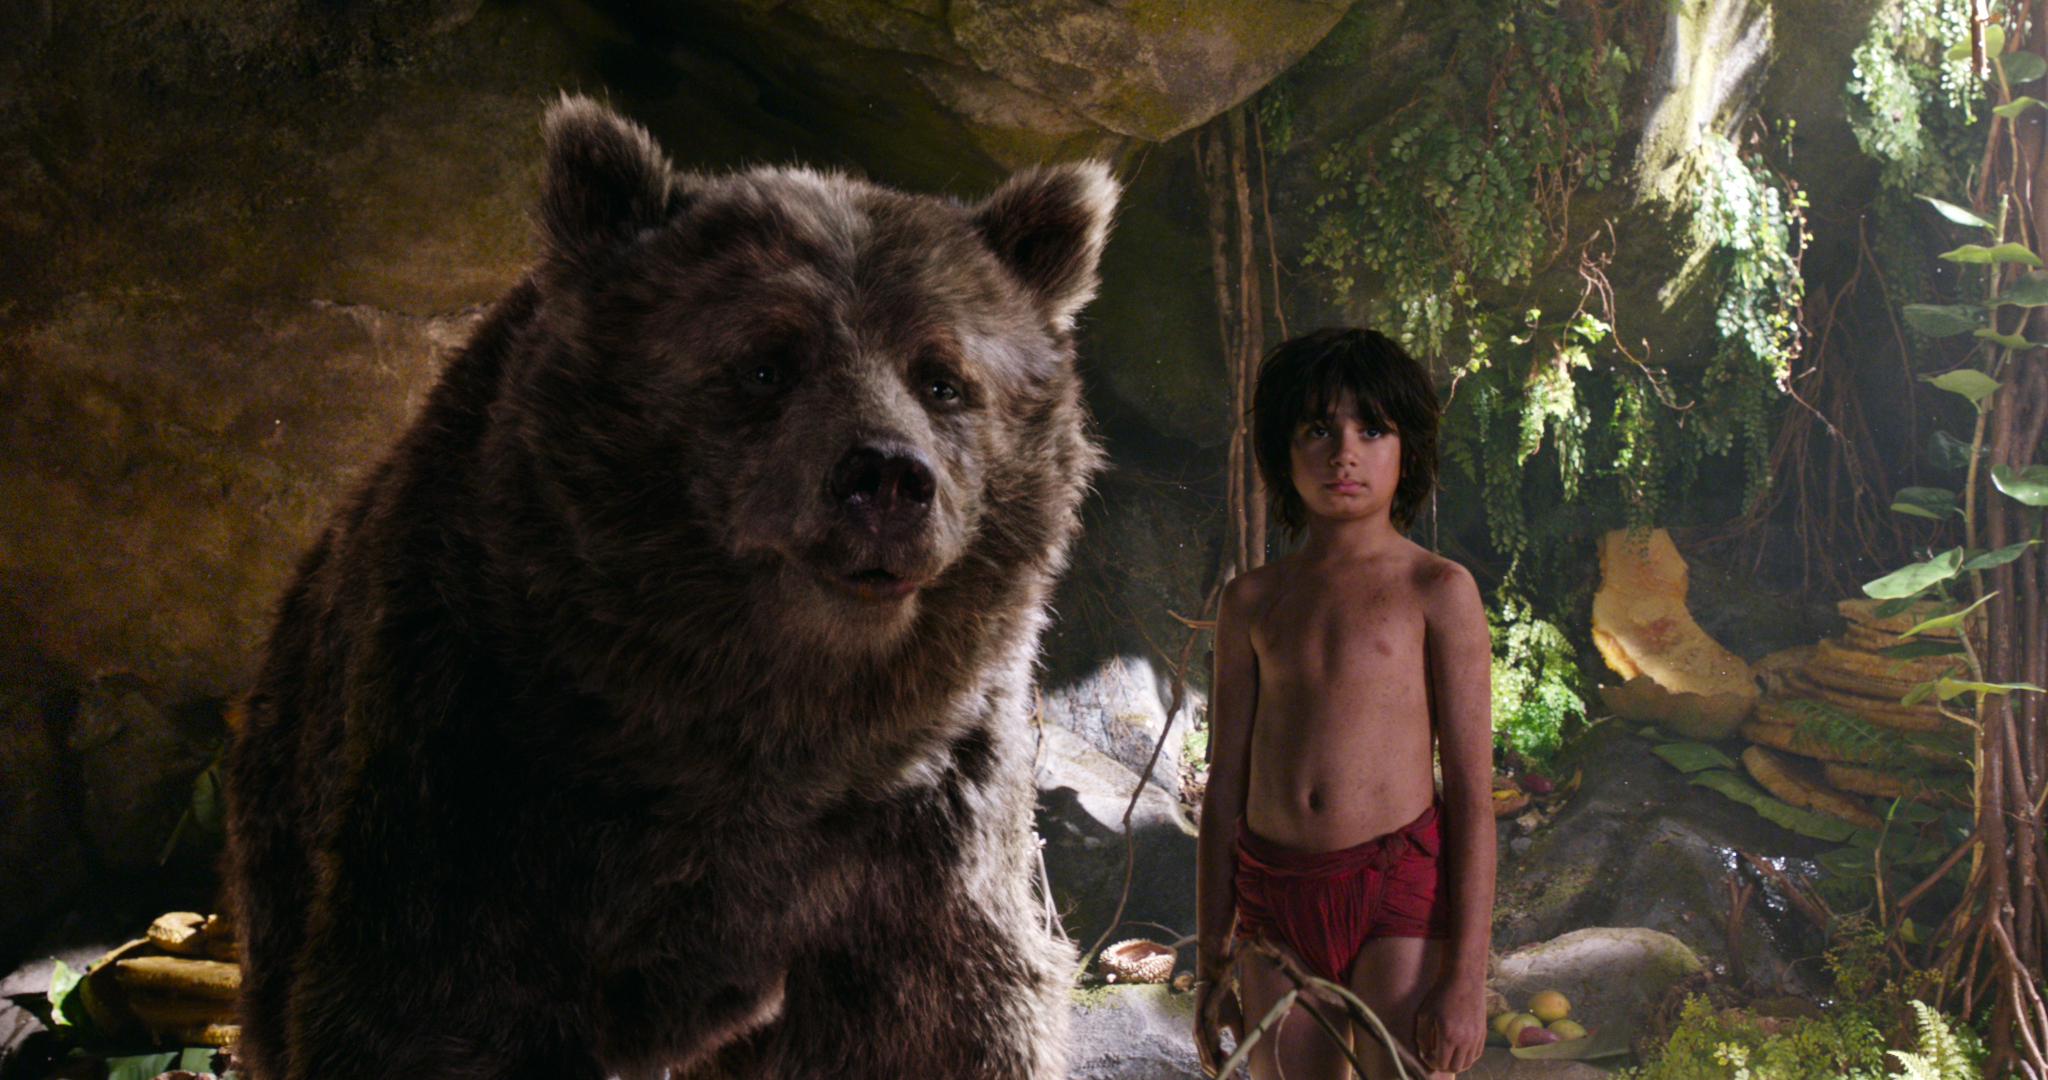 Movie The Jungle Book (2016) HD Wallpaper | Background Image